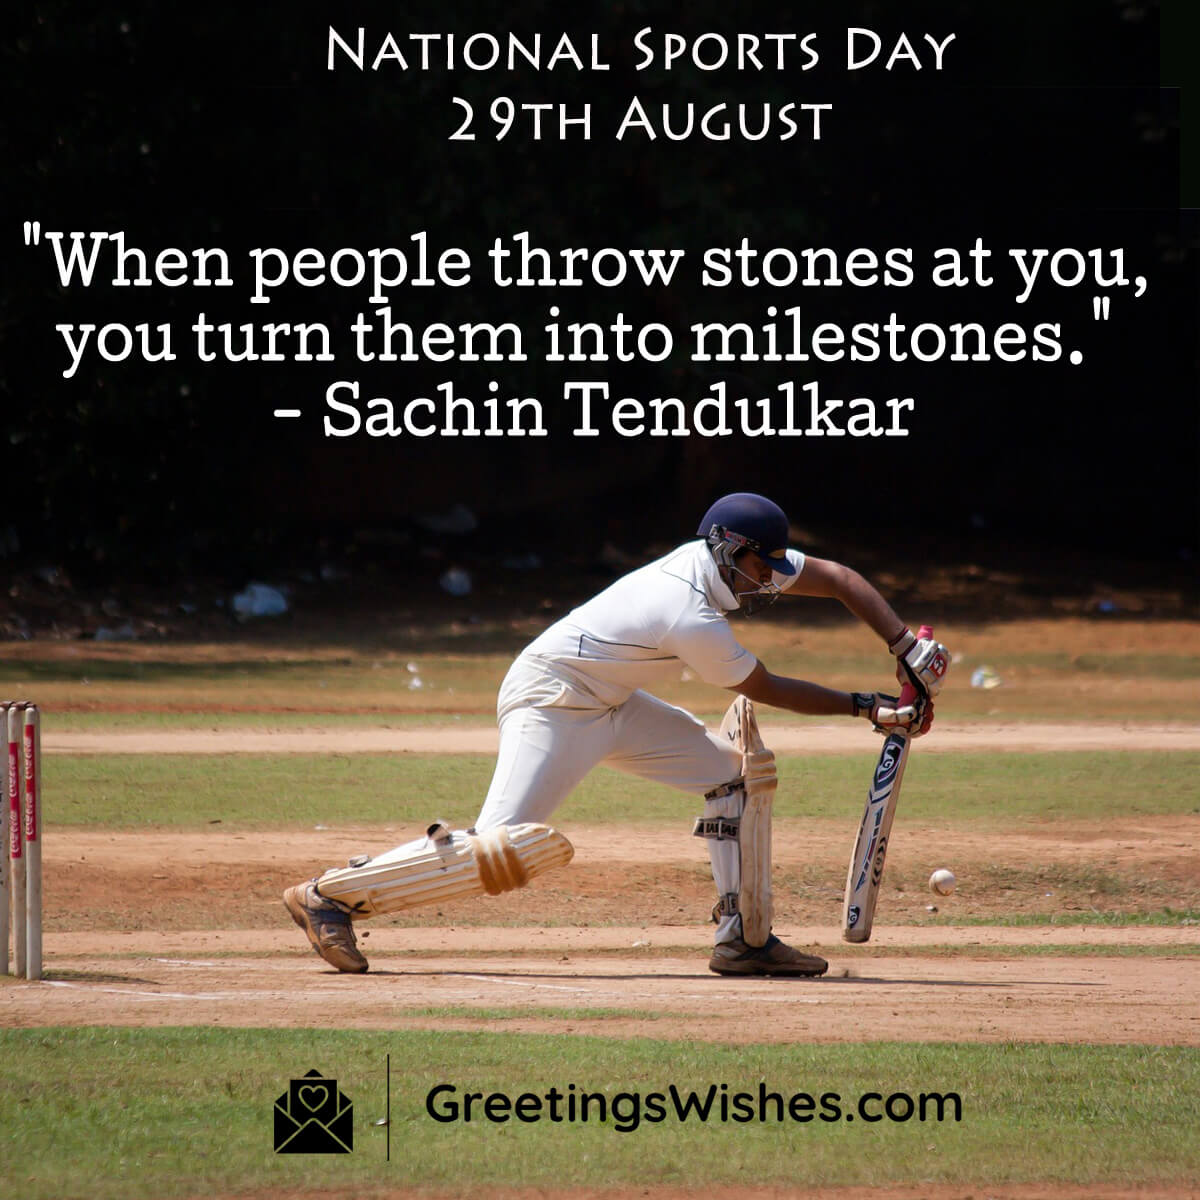 National Sports Day (29th August)